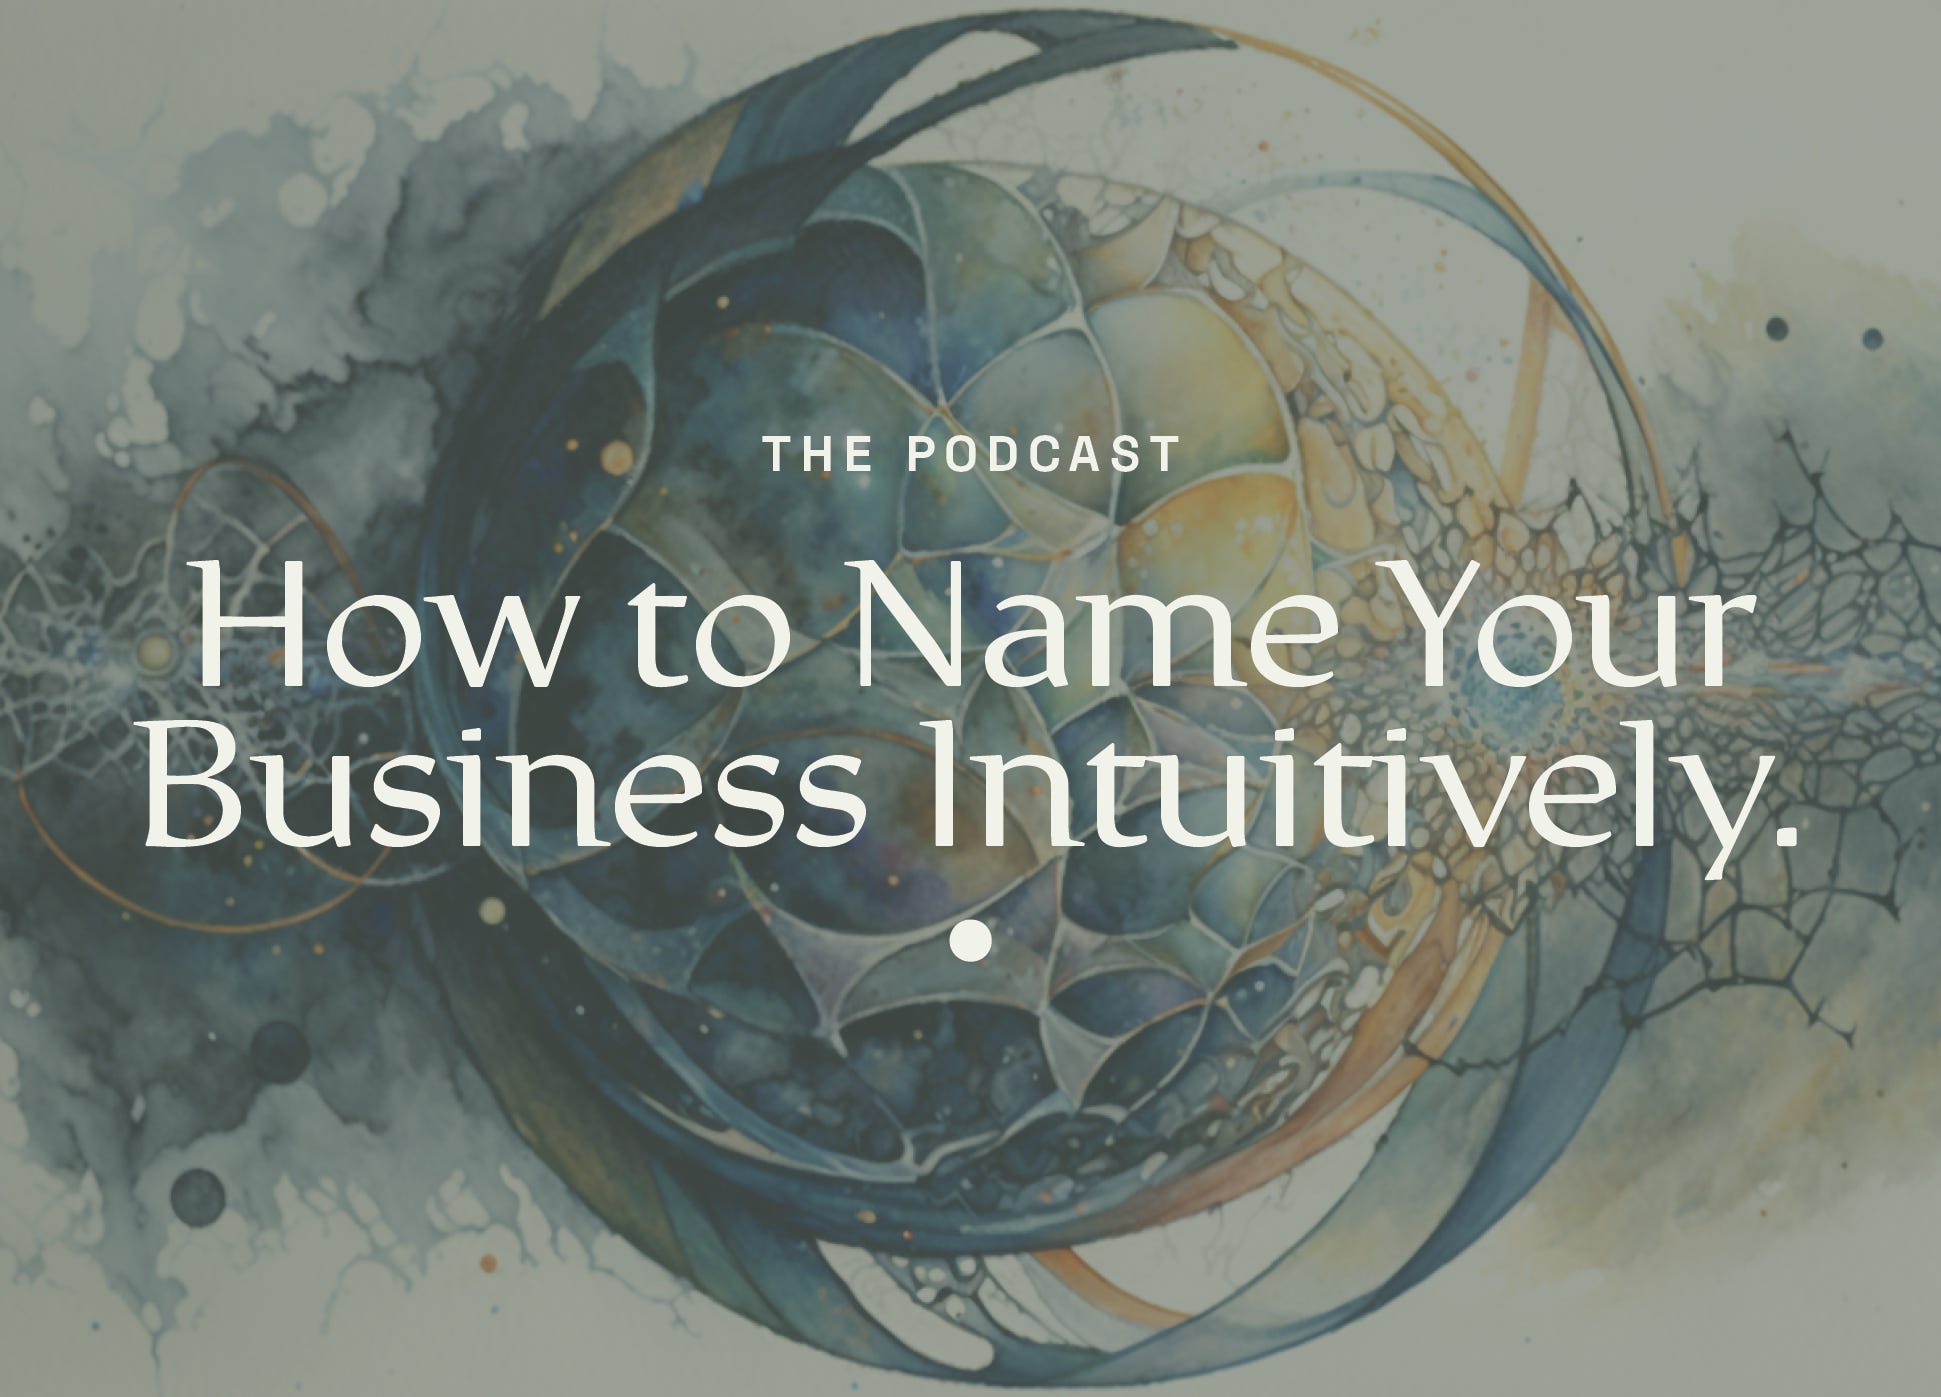 2 – How To Name Your Business Intuitively